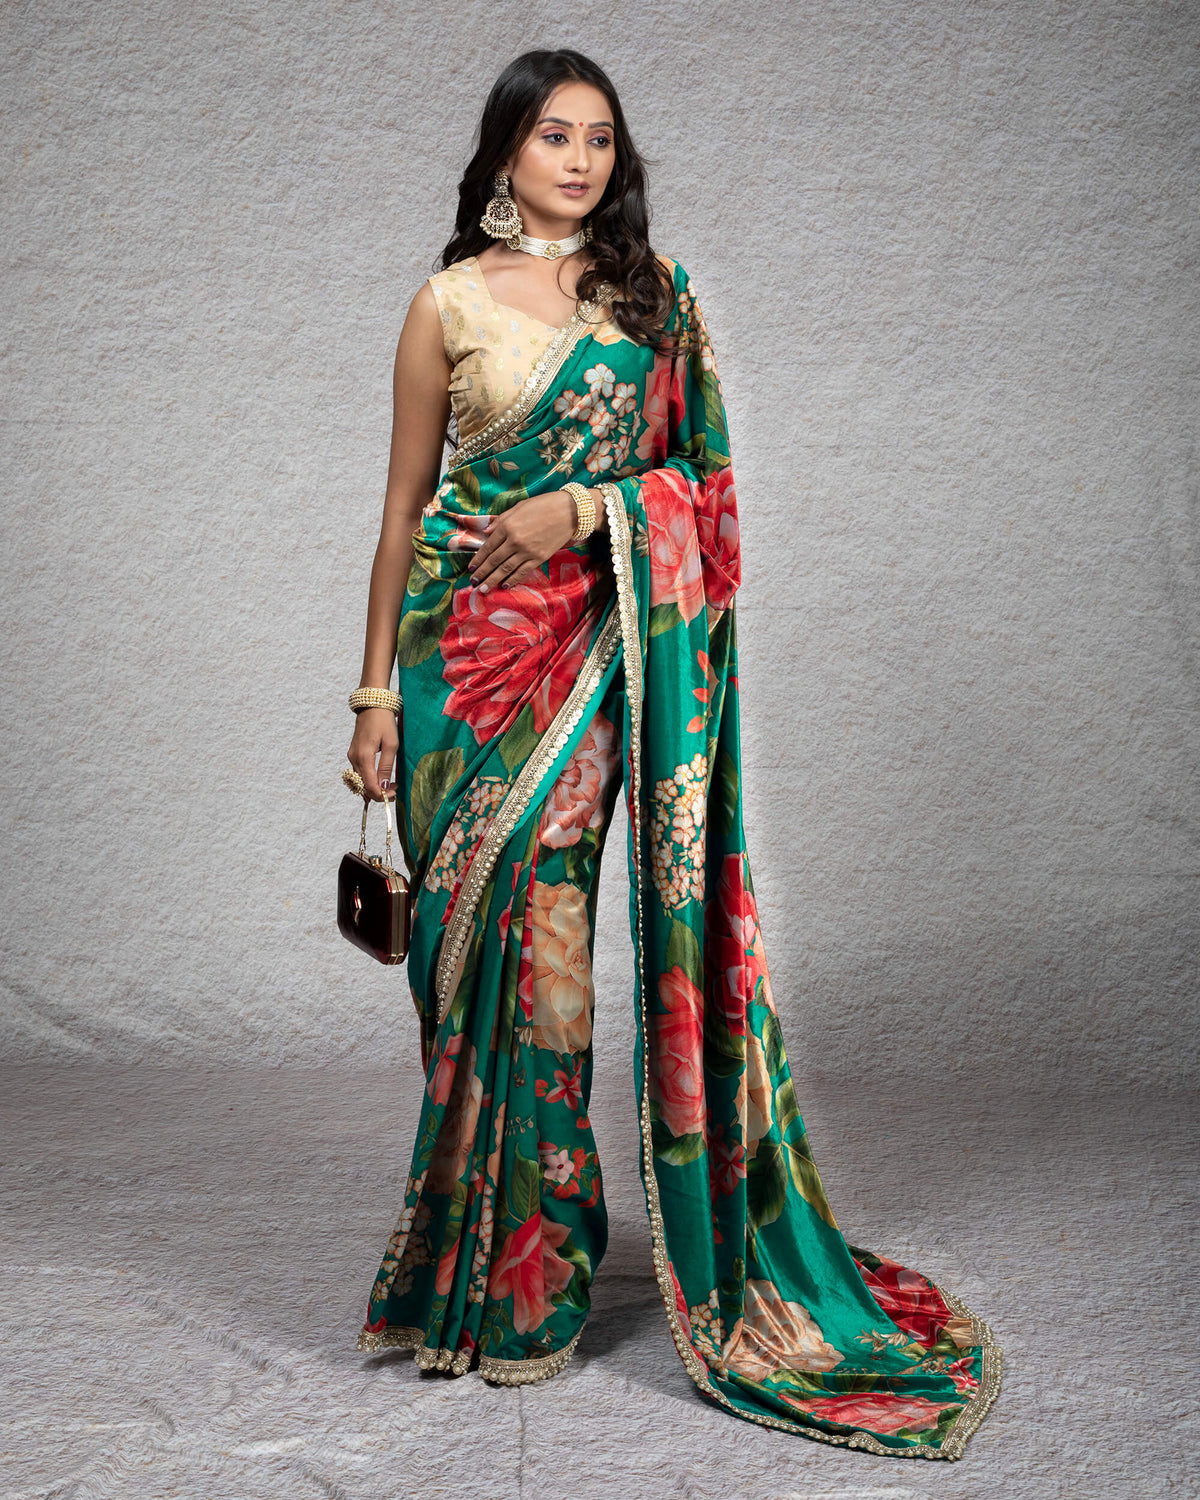 Teal Green And Pink Floral Pattern Digital Print Premium Velvet Saree With Zari Sequins Pearl Work Lace Border